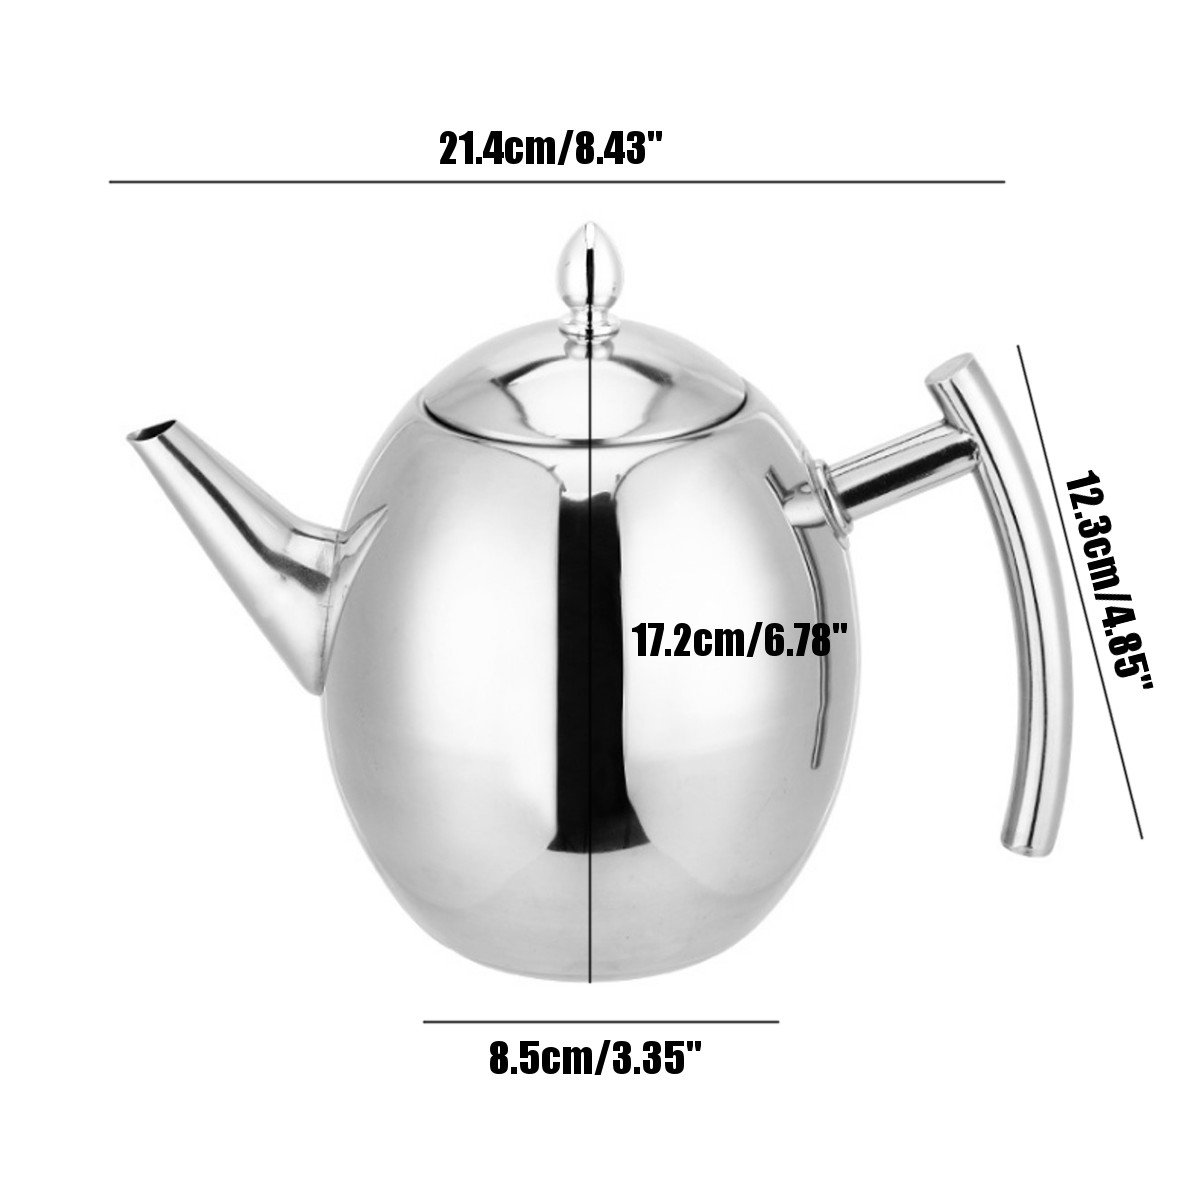 1.5L Stainless Steel Teapot Flower Tea Coffee Teapot Kettle with Filter Kitchen